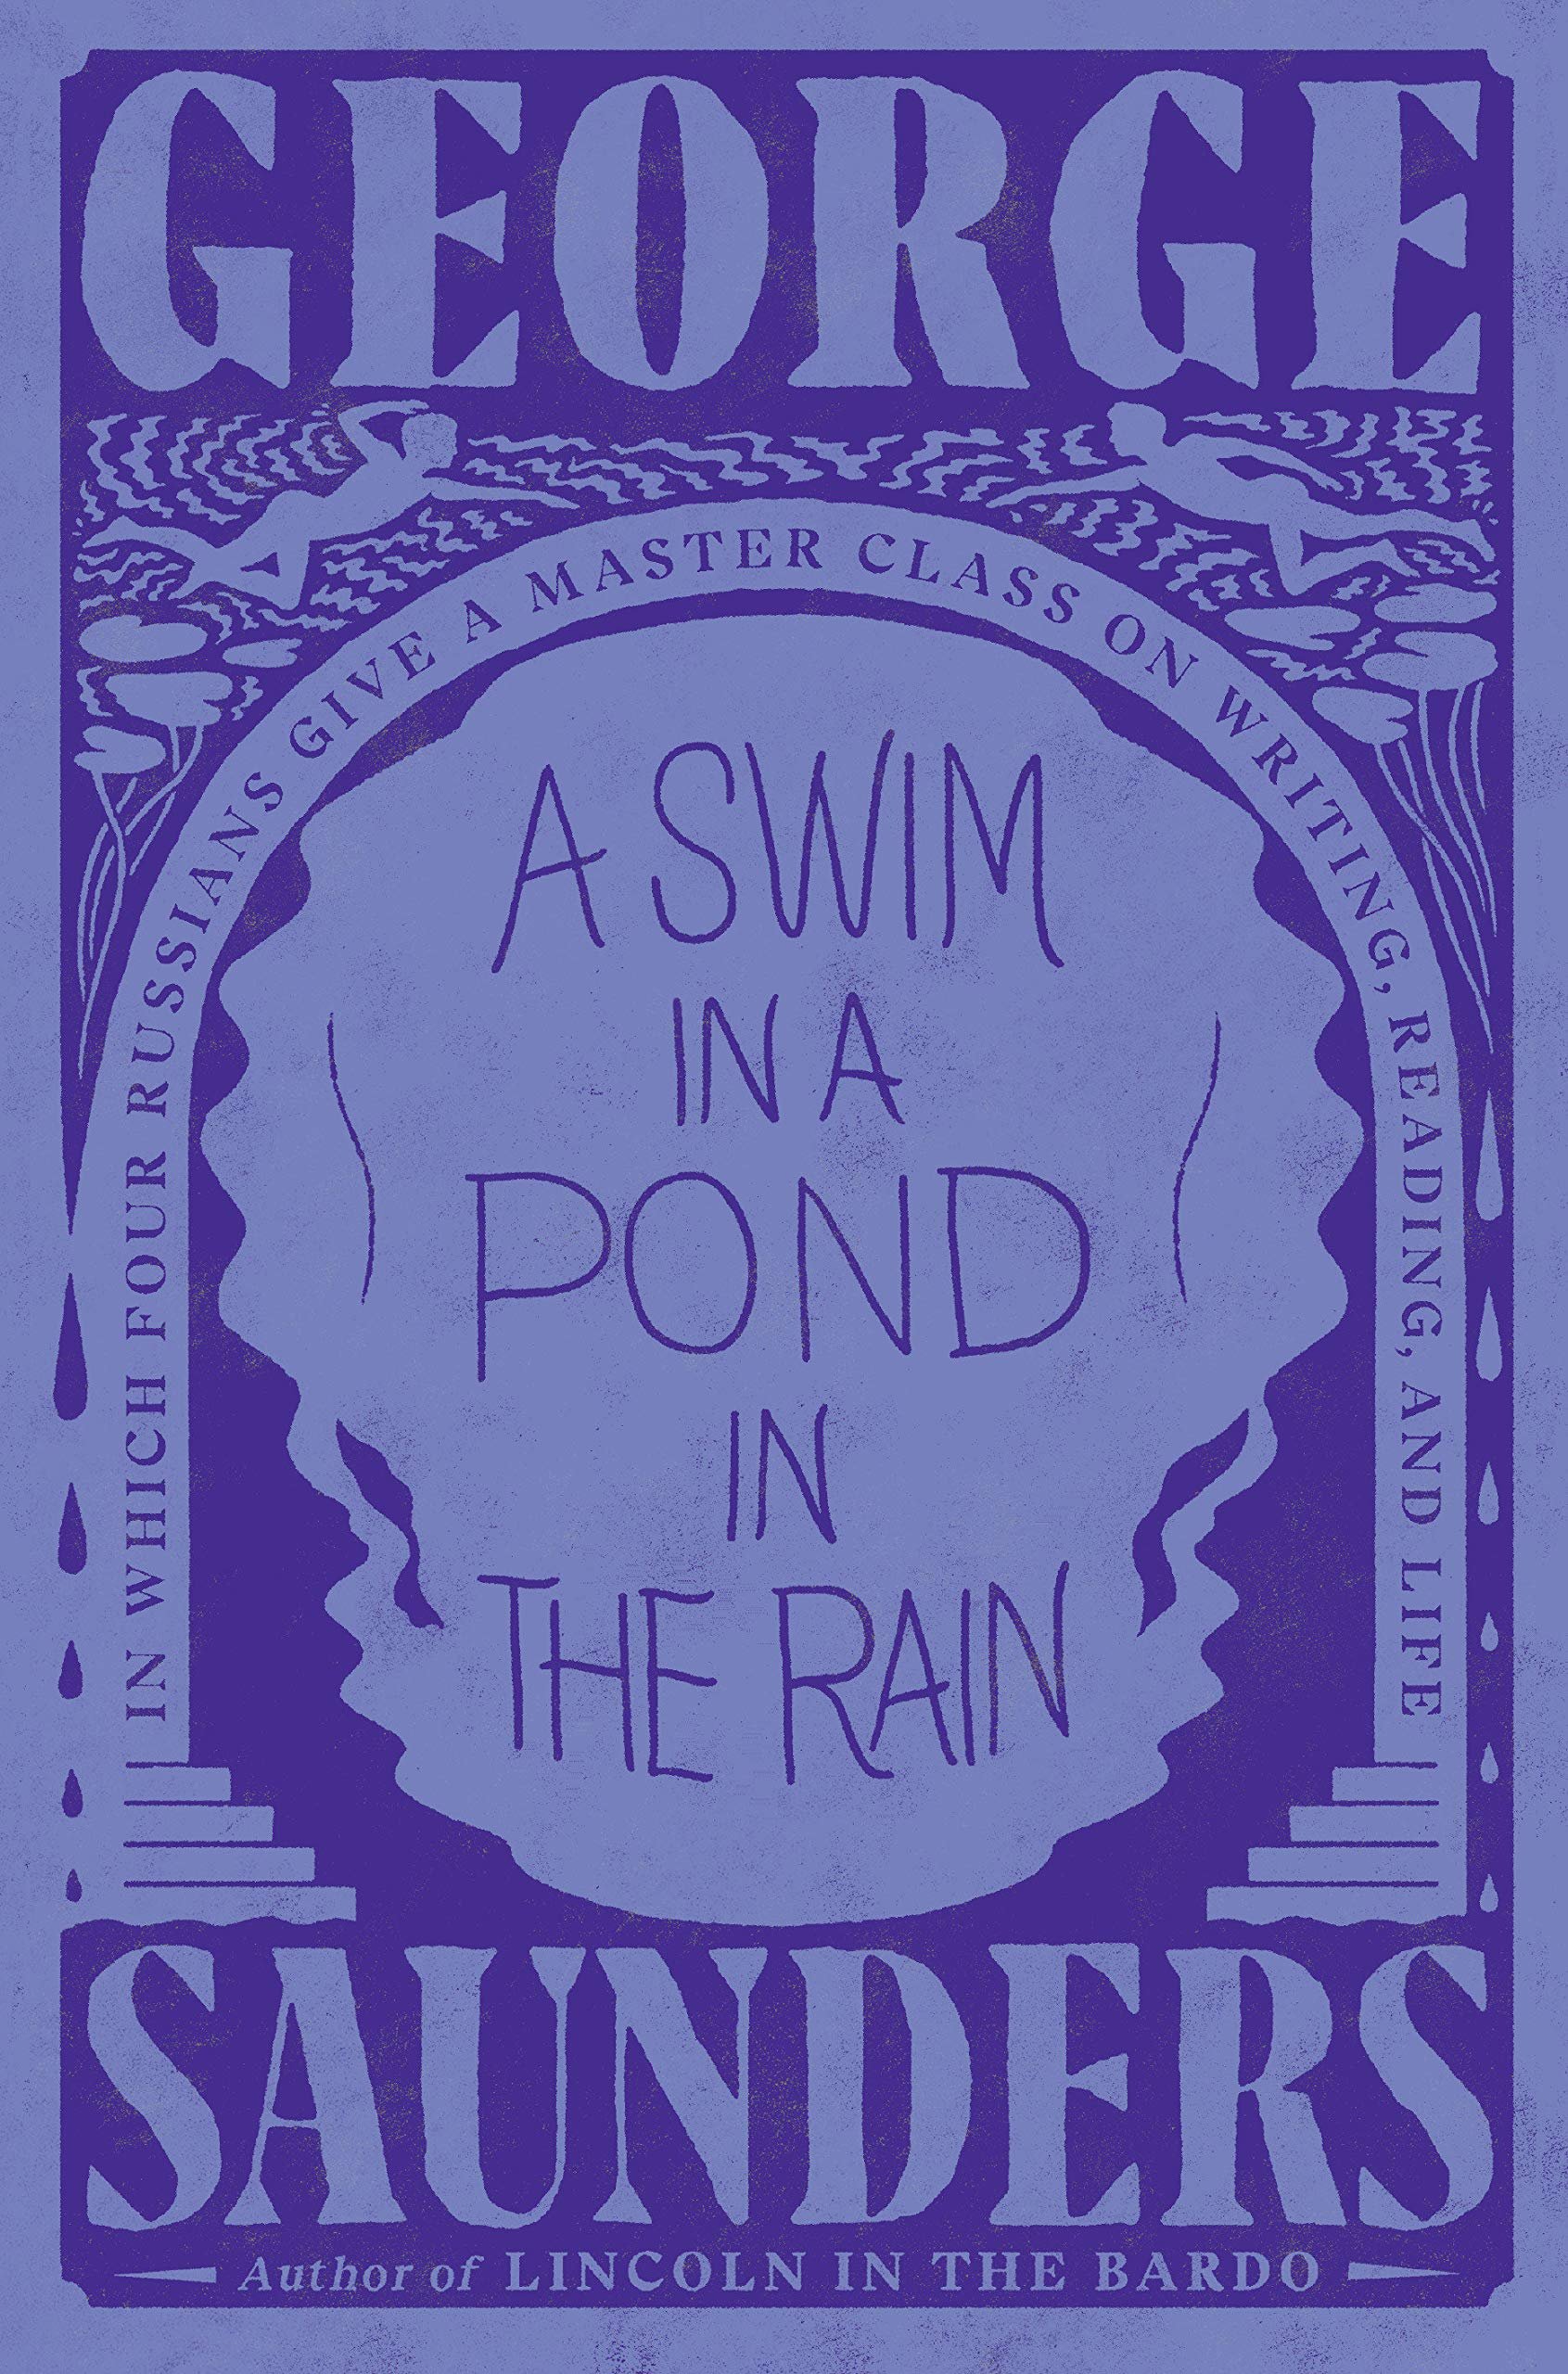 A Swim in a Pond in the Rain by George Saunders.jpg